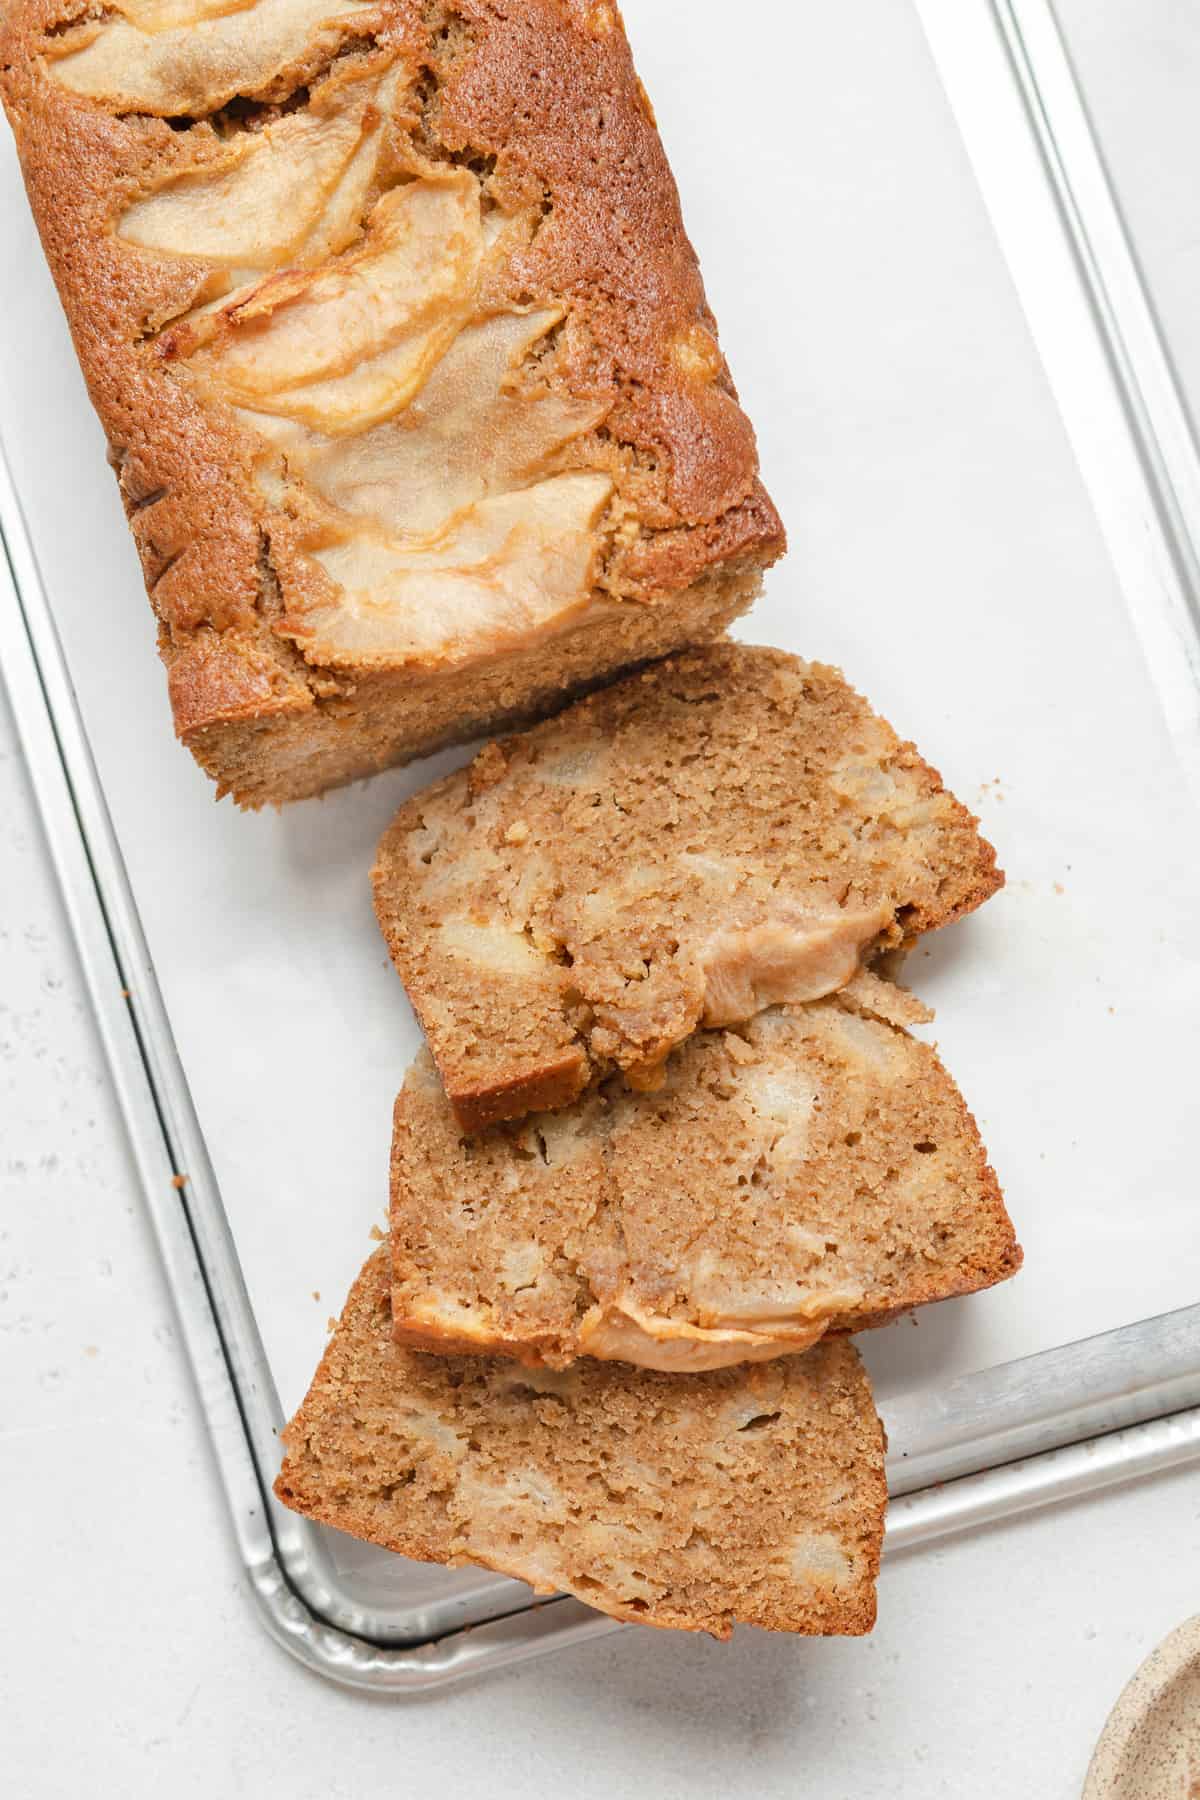 Three slices of pear bread on an upside down baking sheet.